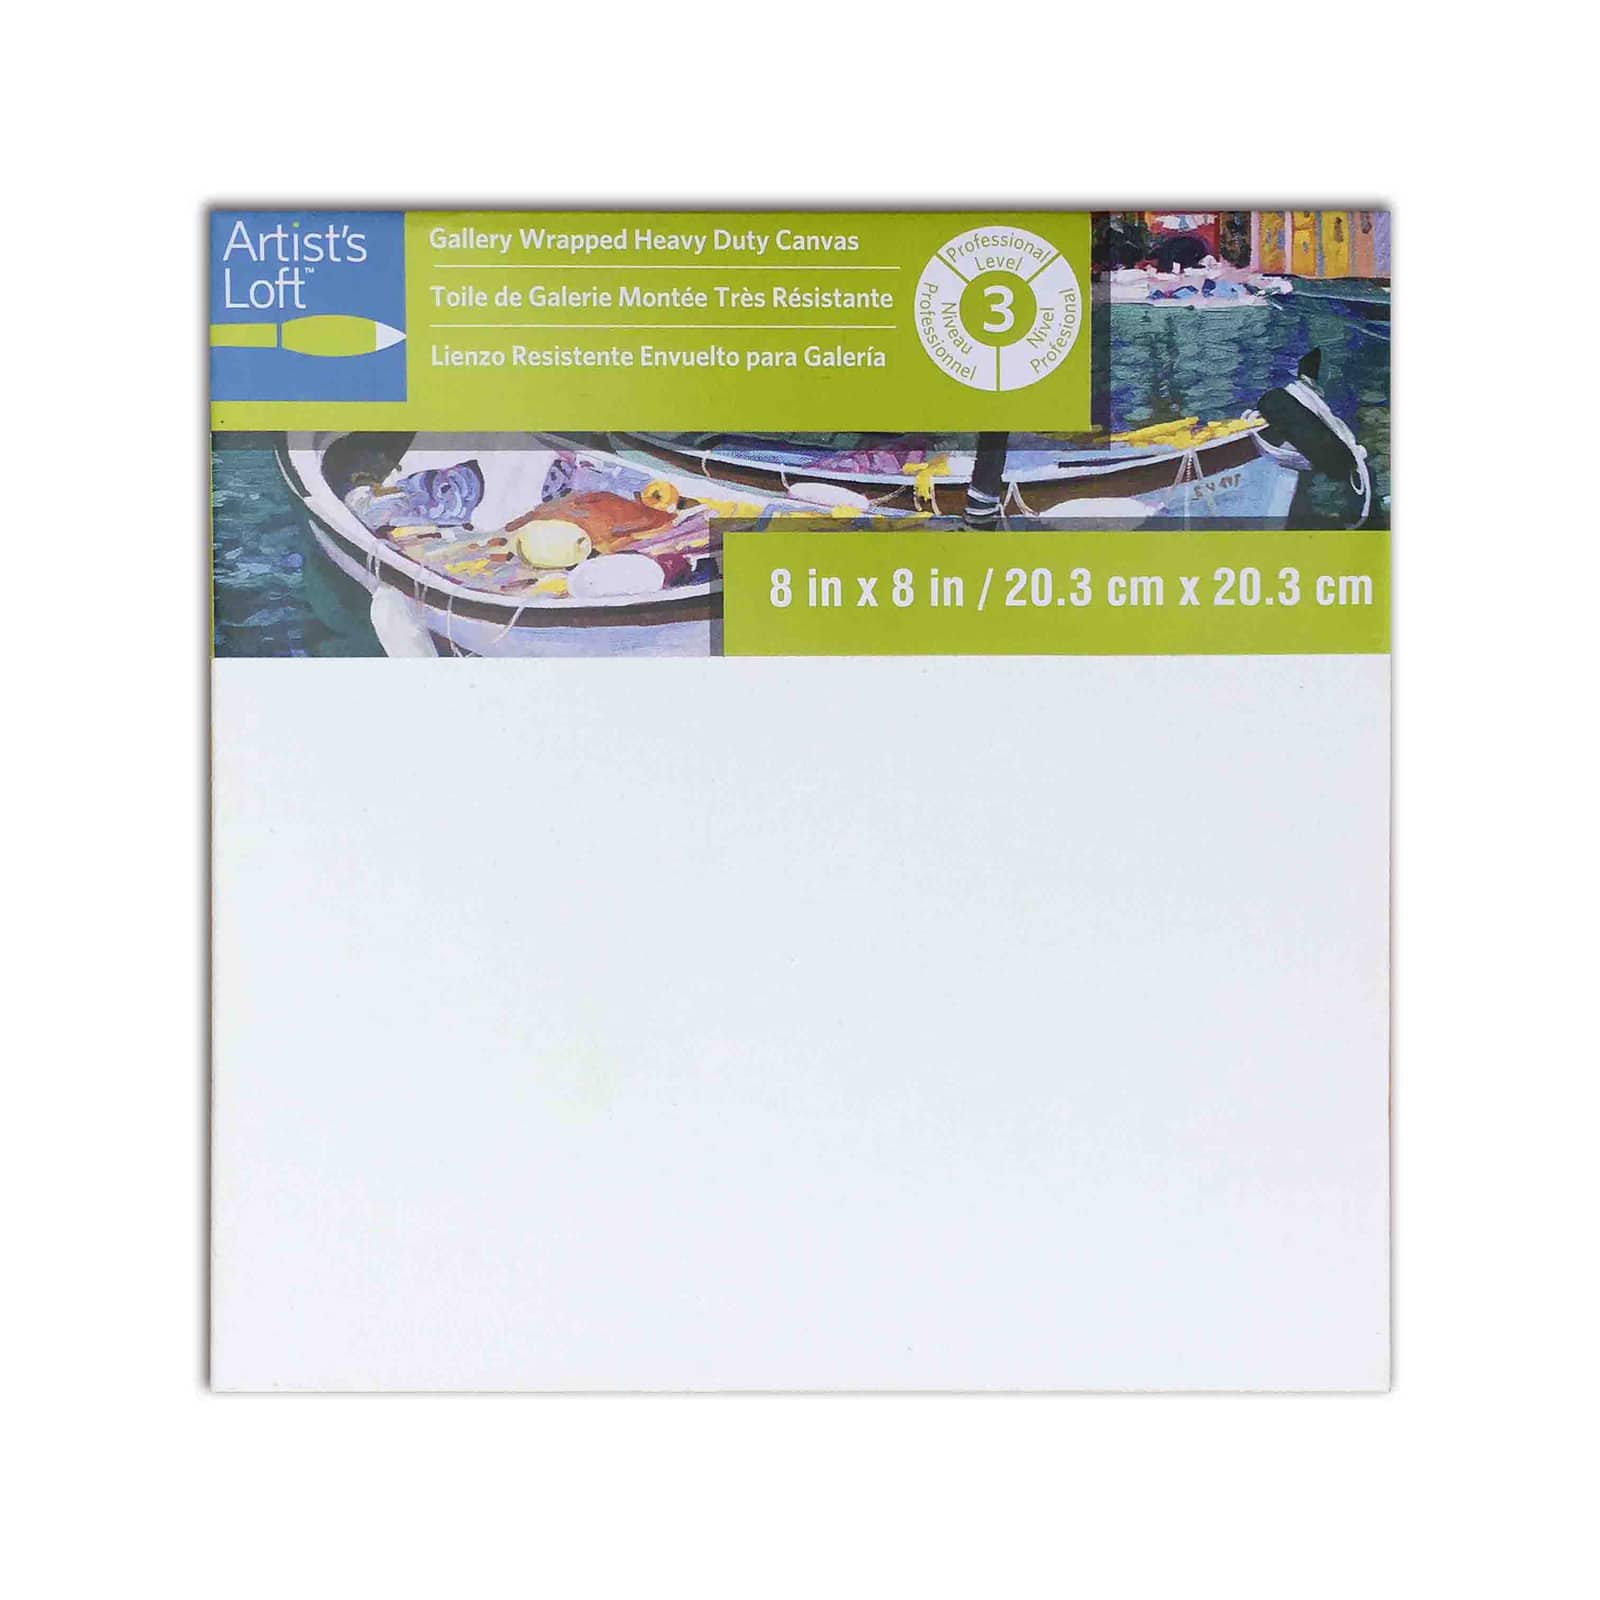 S & E TEACHER'S EDITION 10 Pcs Stretched Canvases with Multi Size Pack,  4x6, 6x8, 8x10, 10x12, 12x14, for Painting, Acrylic Pouring, Oil Paint 